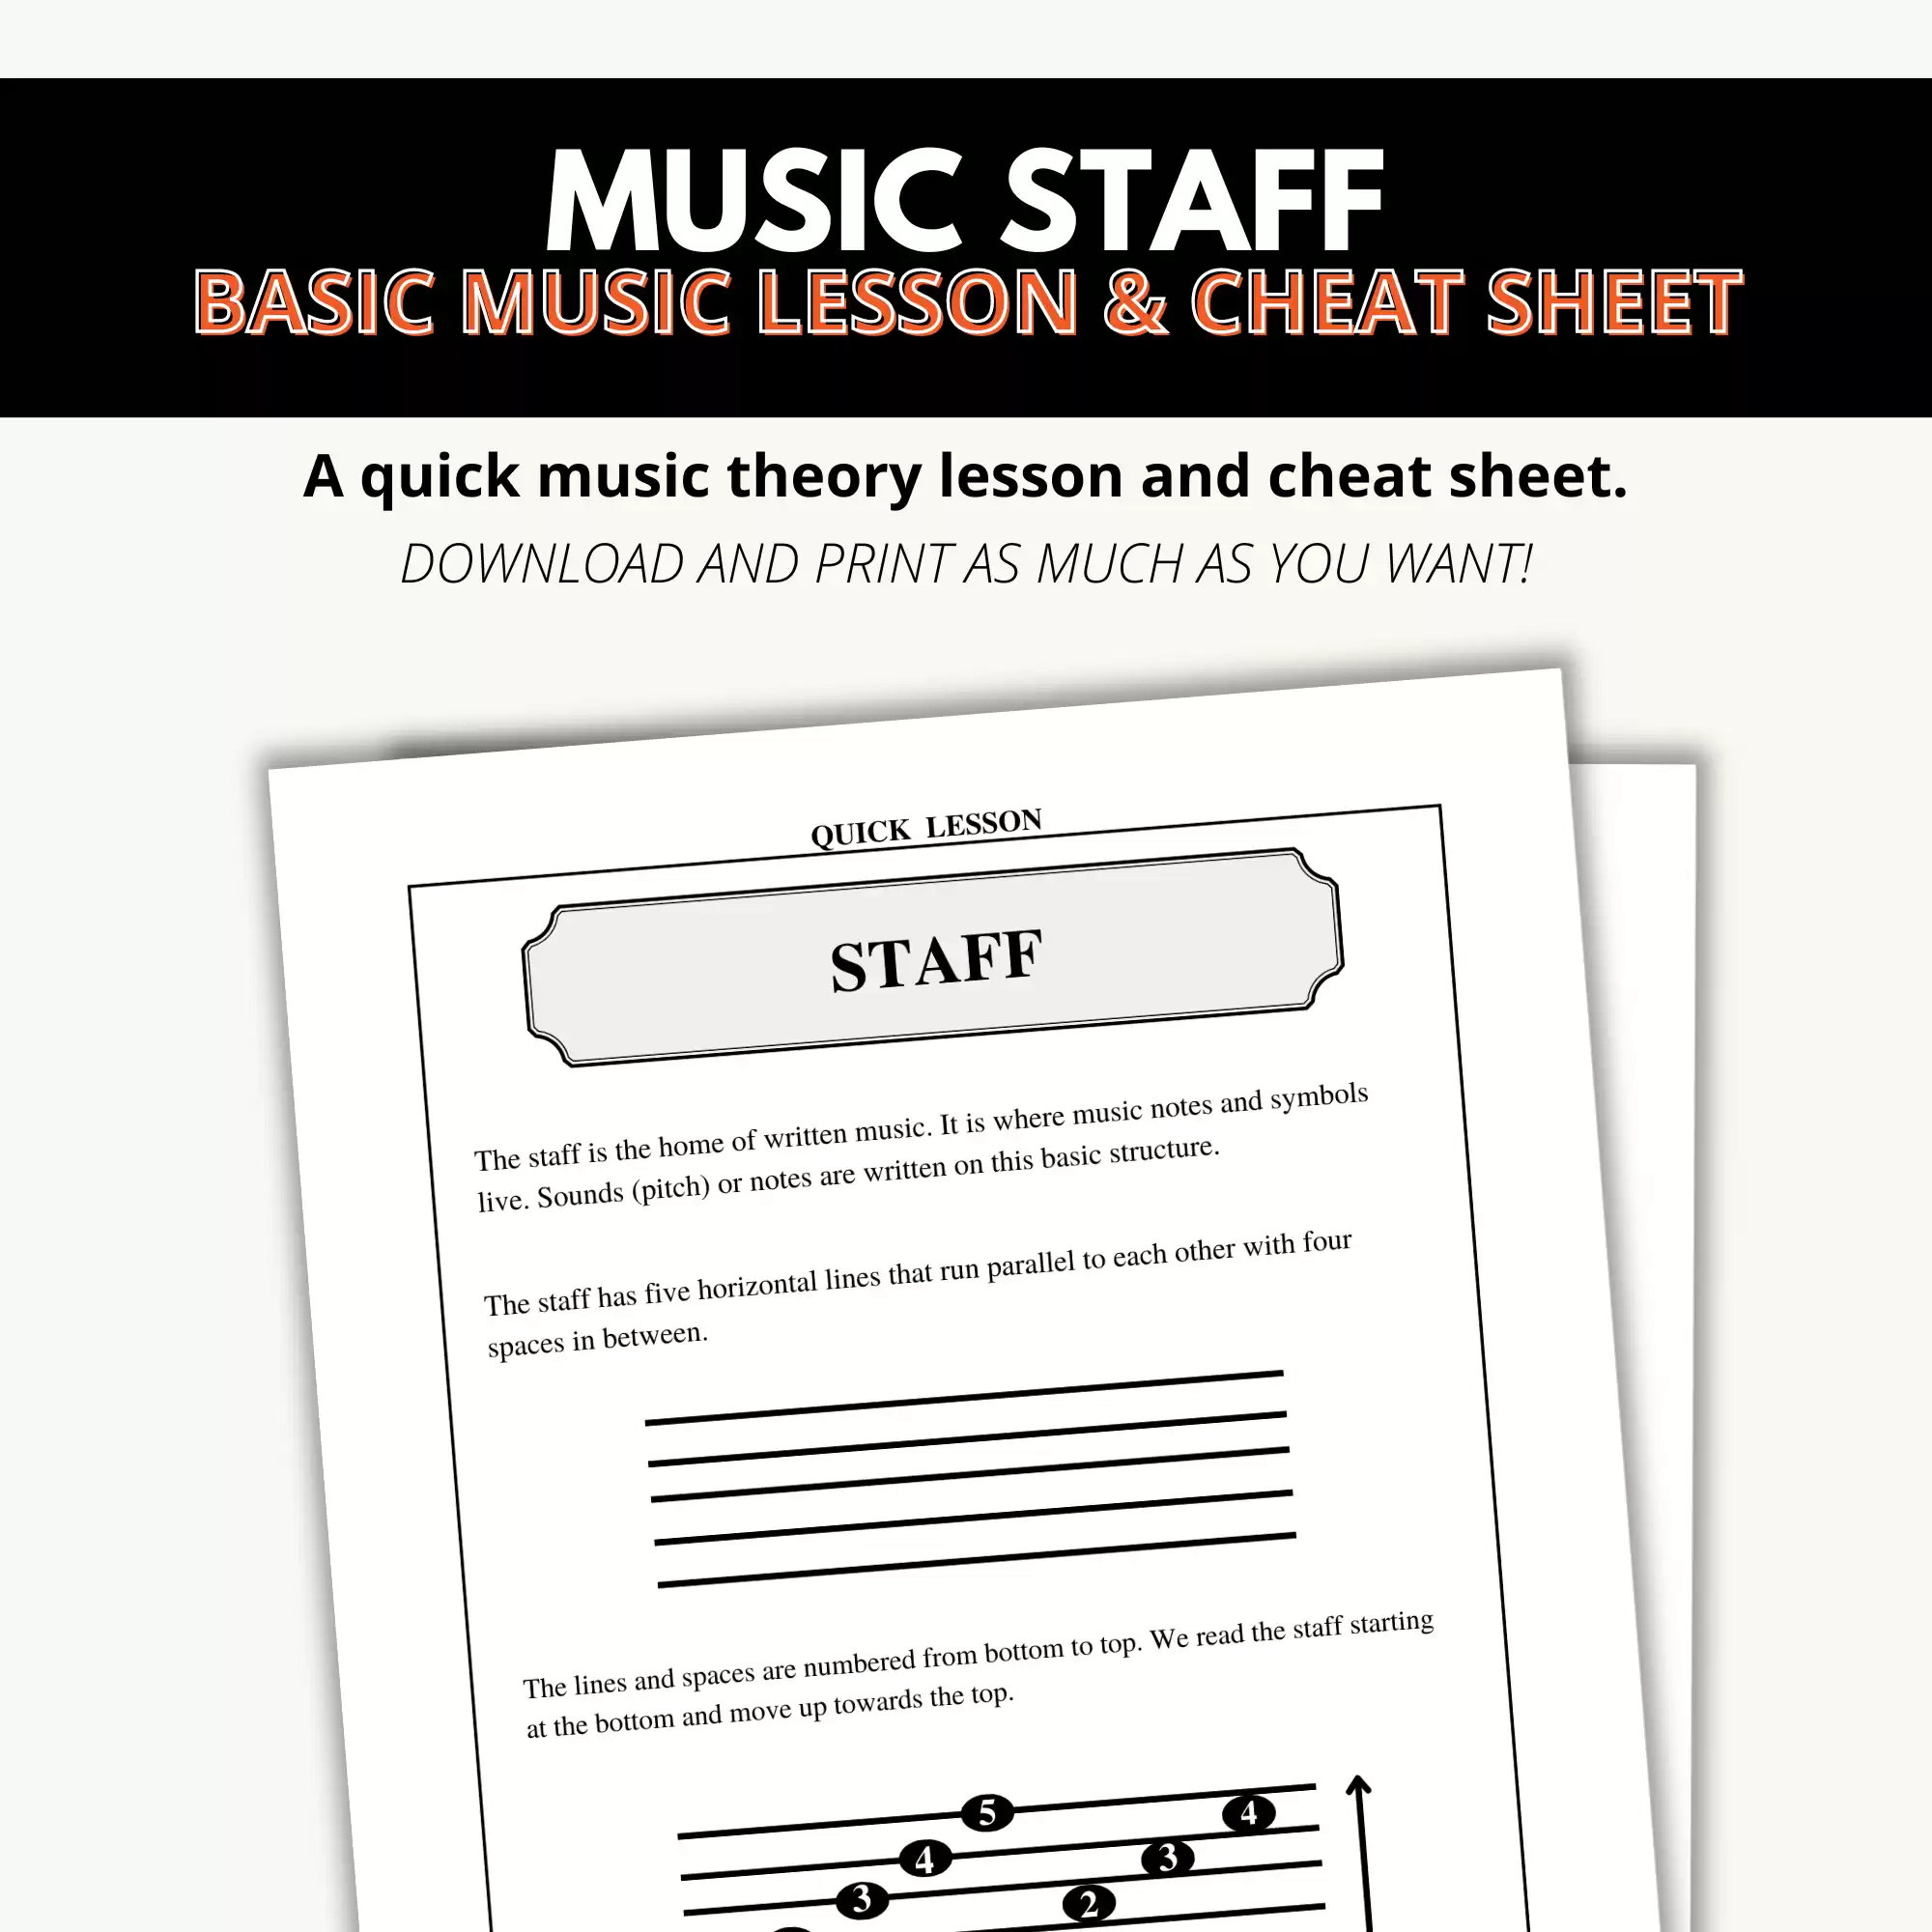 Music Staff Lesson and Cheat Sheet [Basic Music Theory Lesson 1]